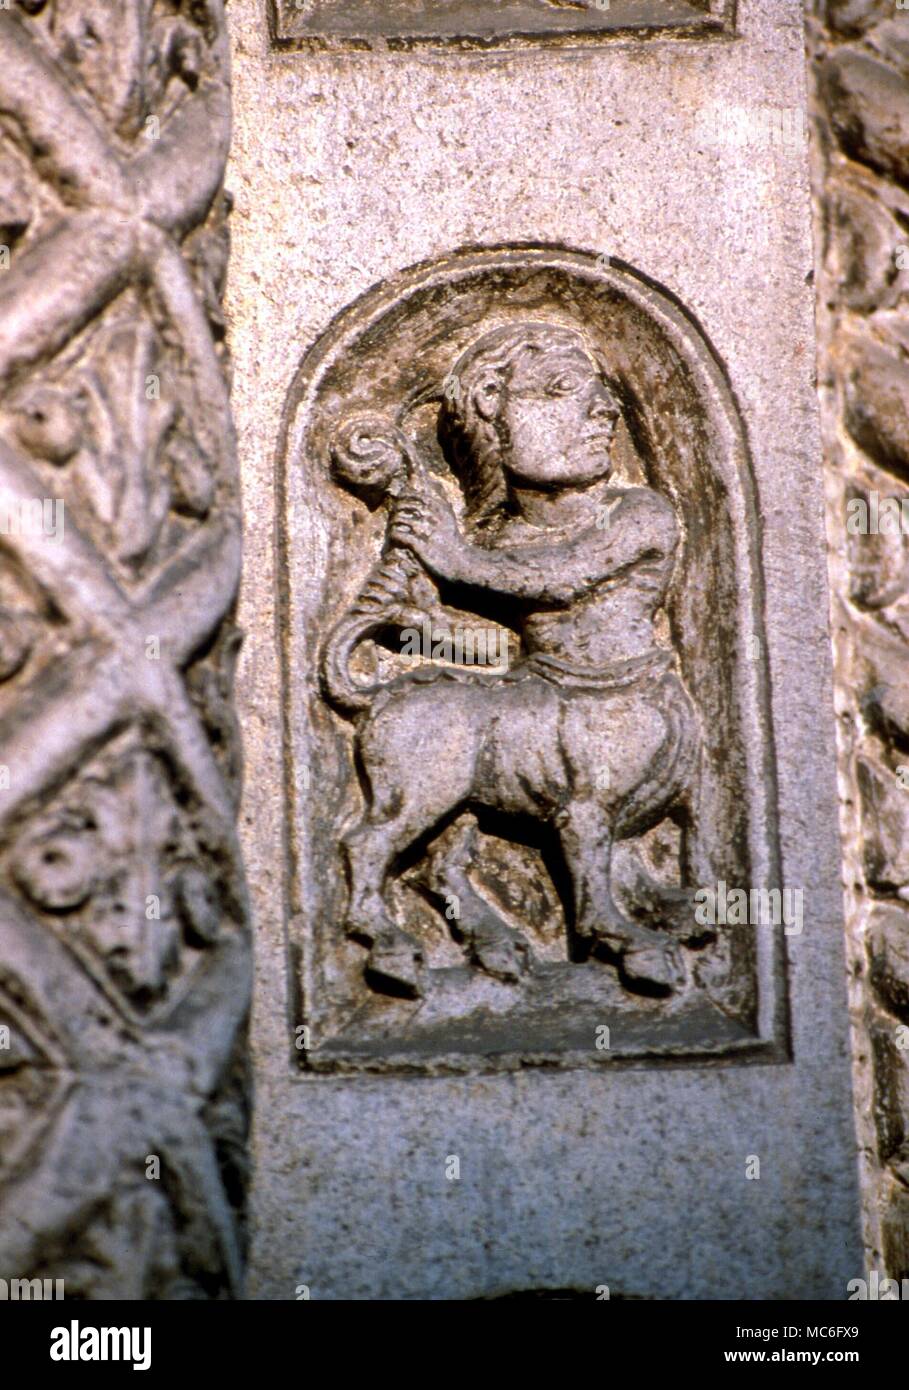 Centaur - detail from mythological figures on the south portal of Ferrara Cathedral, Italy. Fourteenth century? Stock Photo